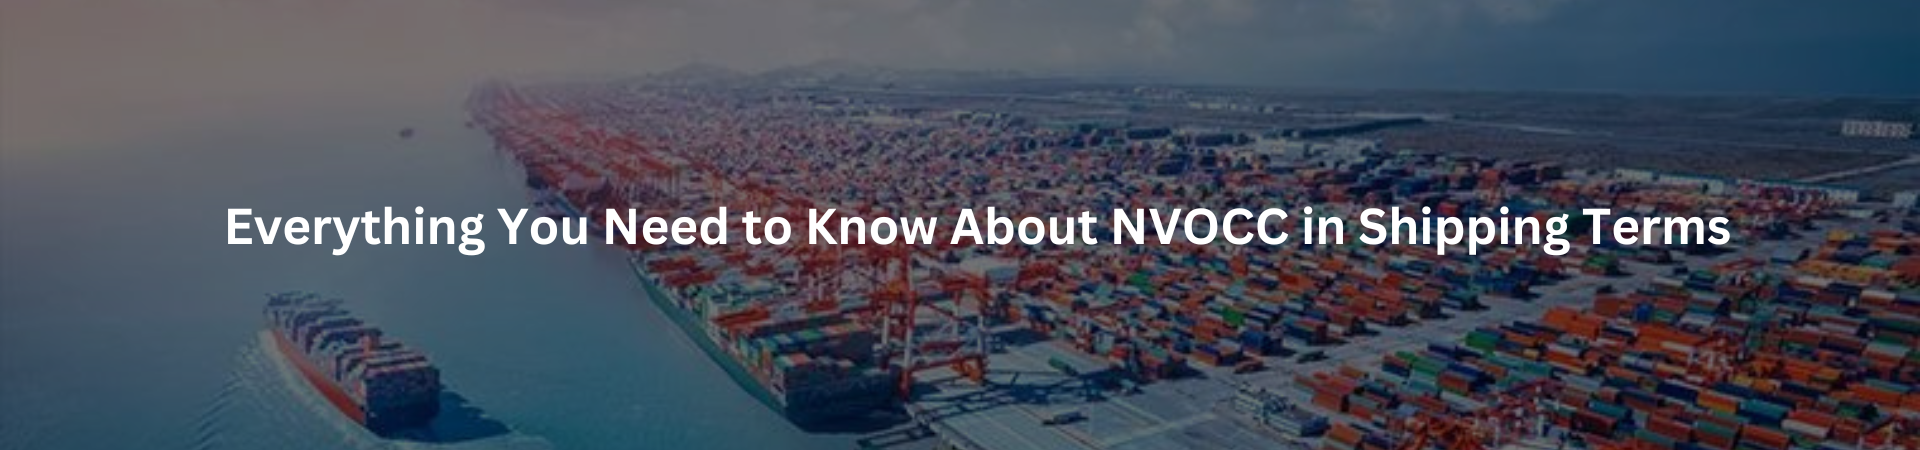 Everything You Need to Know About NVOCC in Shipping Terms - Riseonic Shipping line